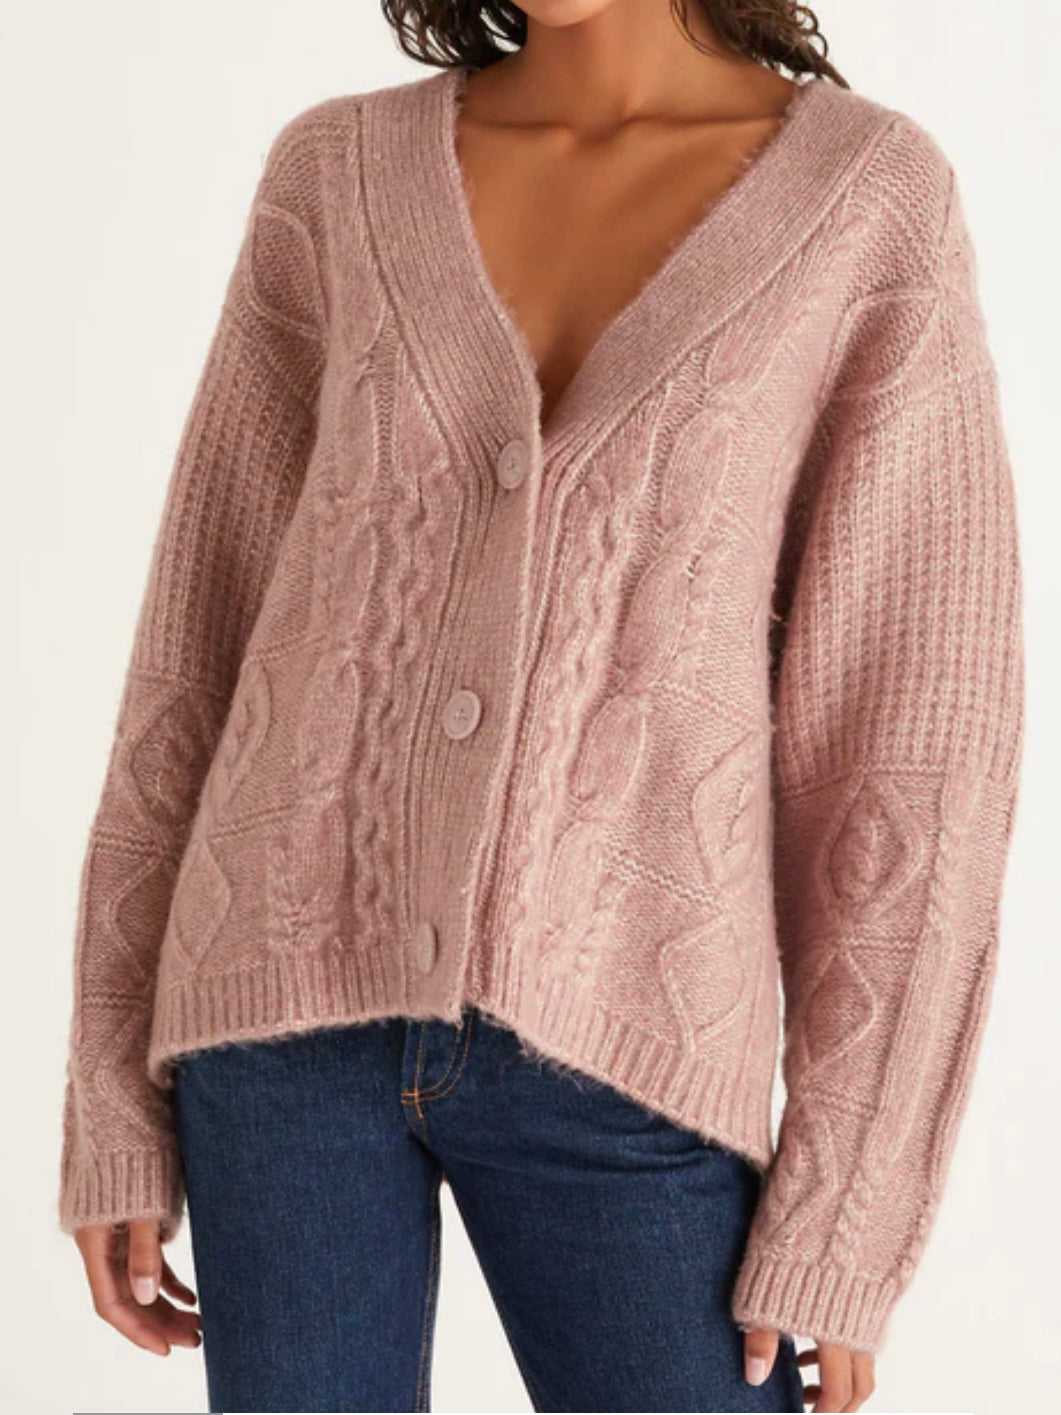 Z Supply Ryleigh Cable Knit Cardigan in Sweet Pink